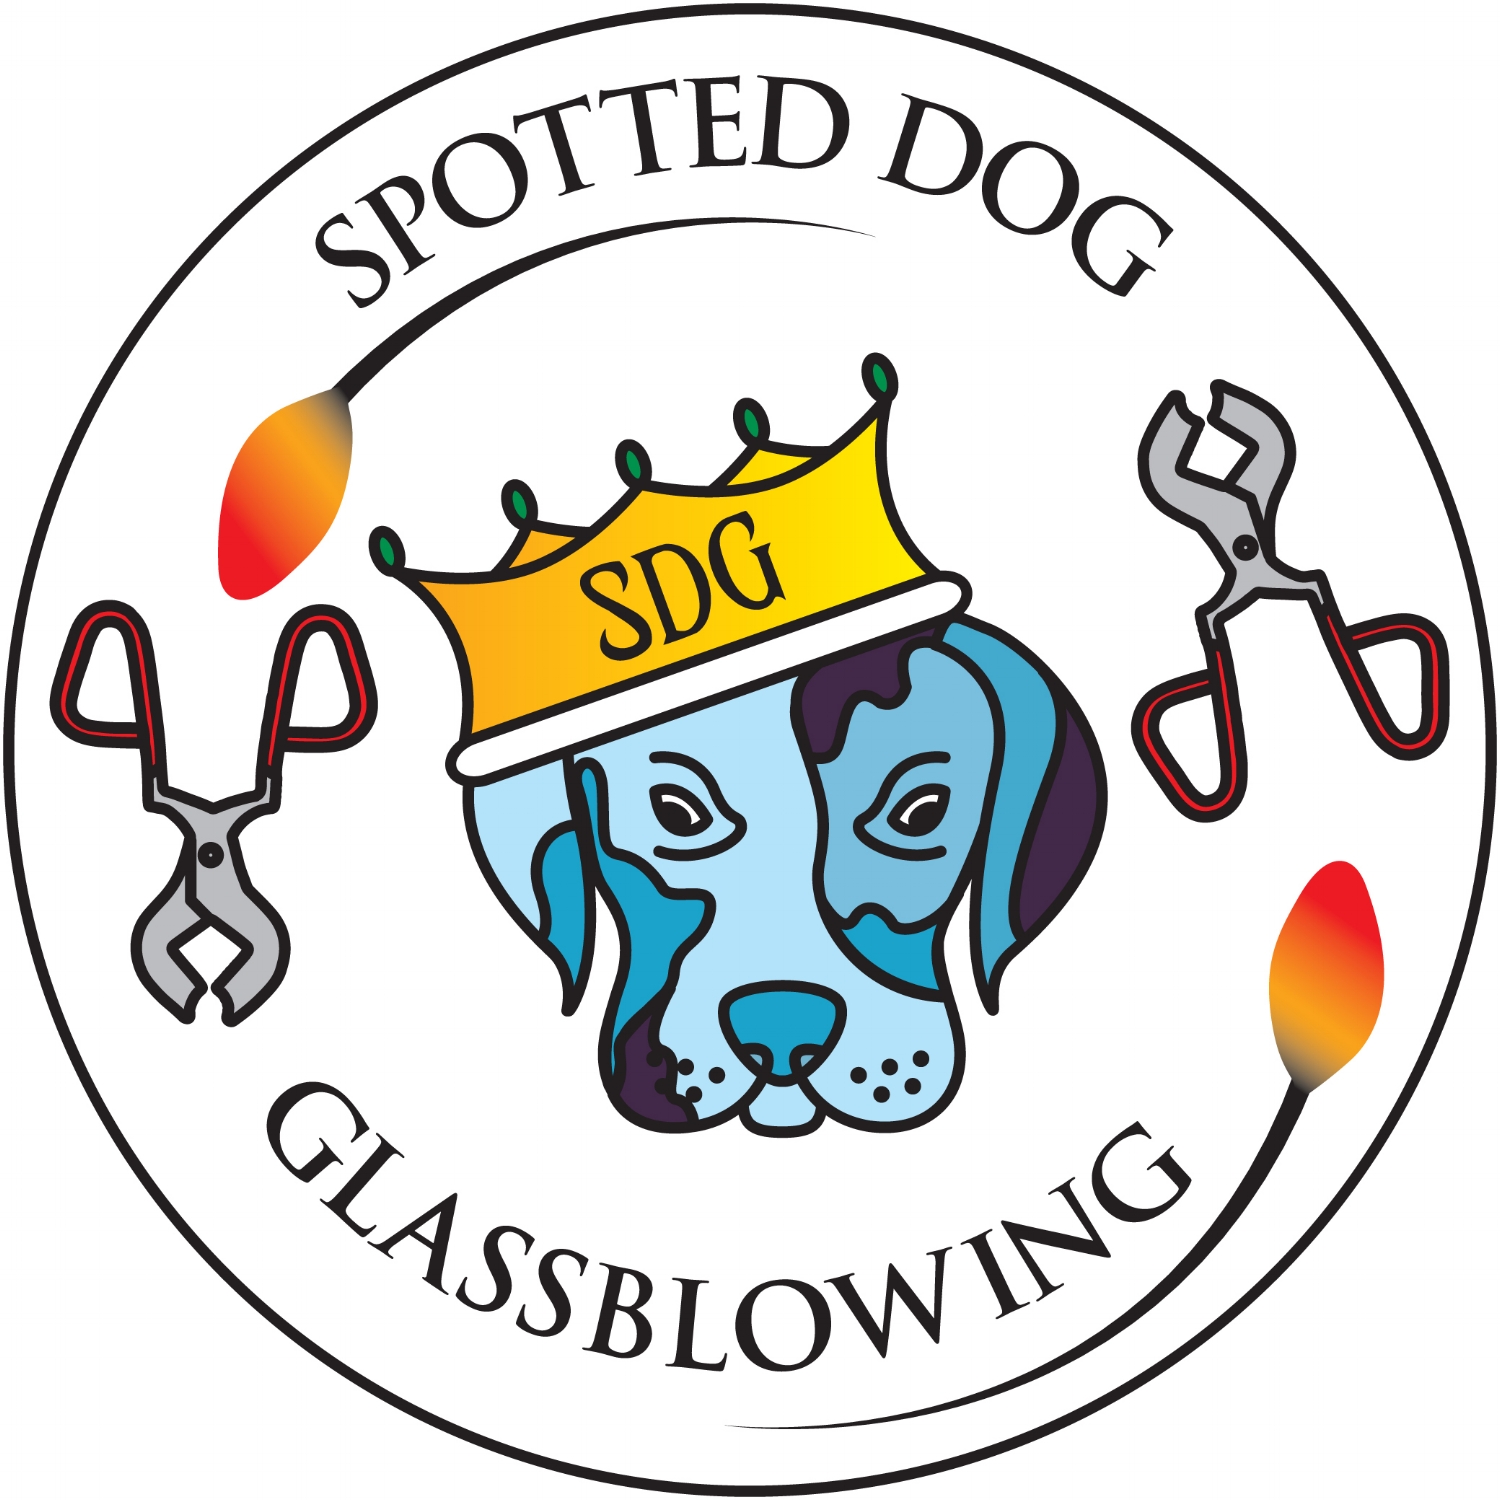 Spotted Dog Glassblowing